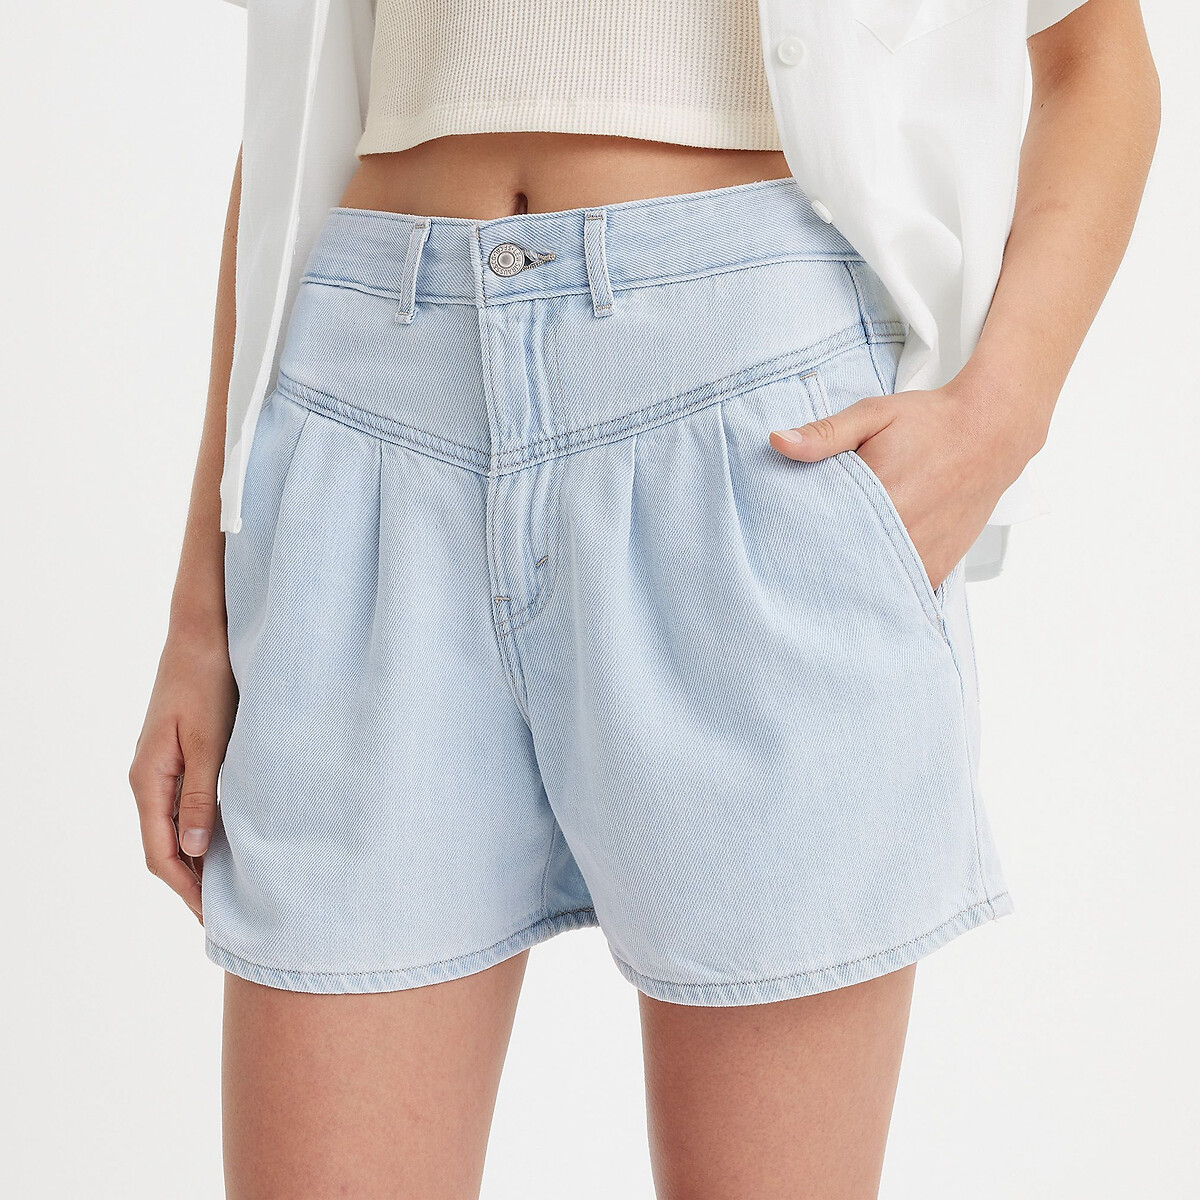 Levis Hotpants "FEATHERWEIGHT MOM"